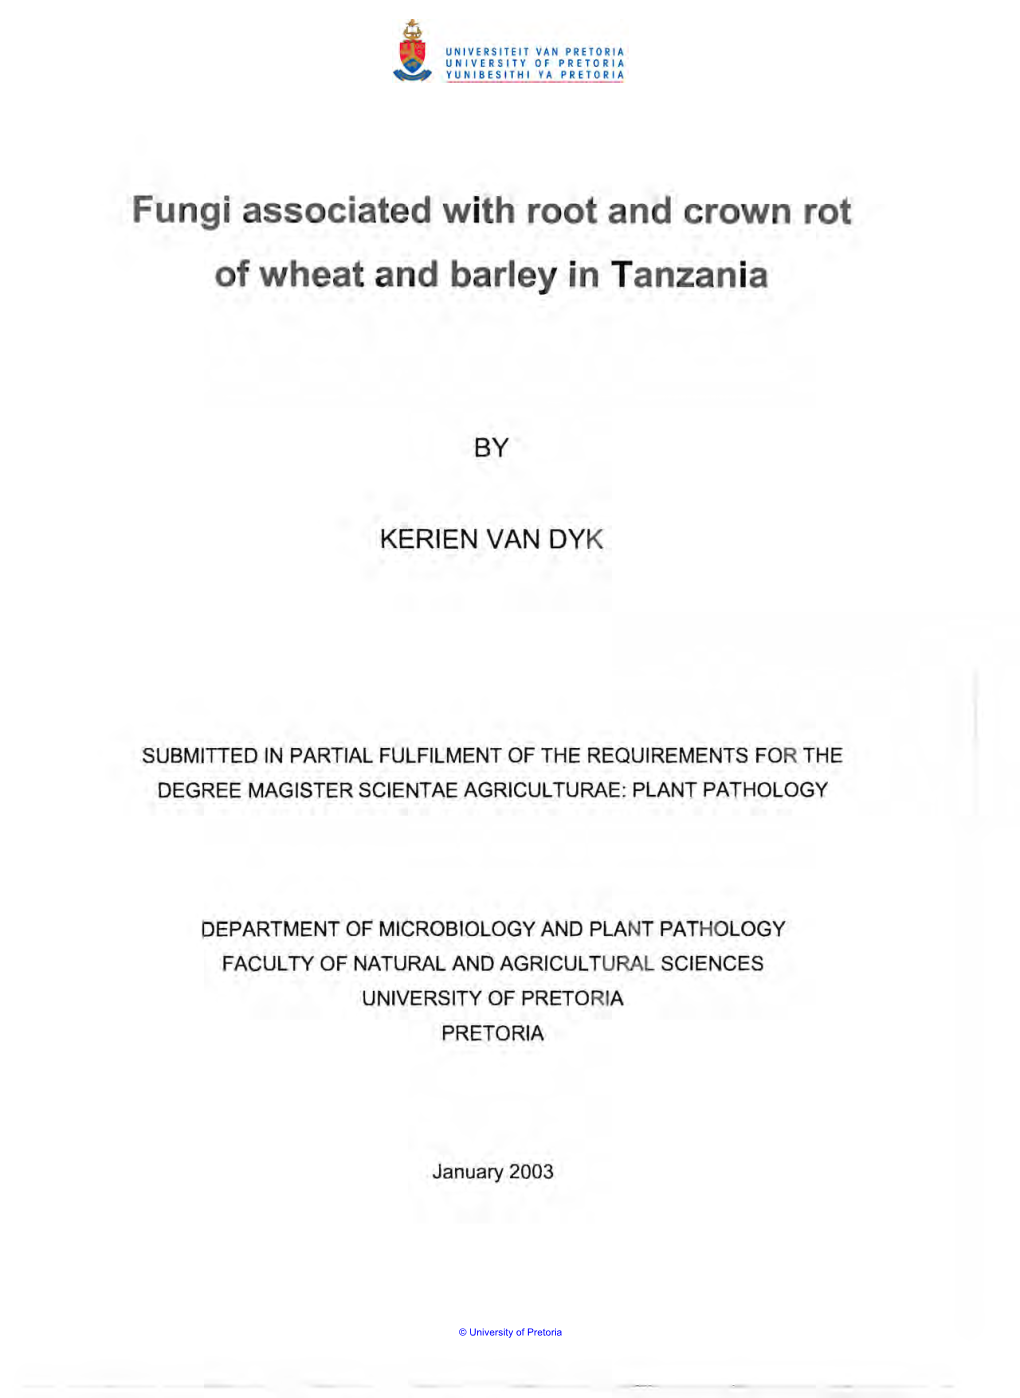 Fungi Associated with Root and Crown Rot of Wheat and Barley in Tanzania